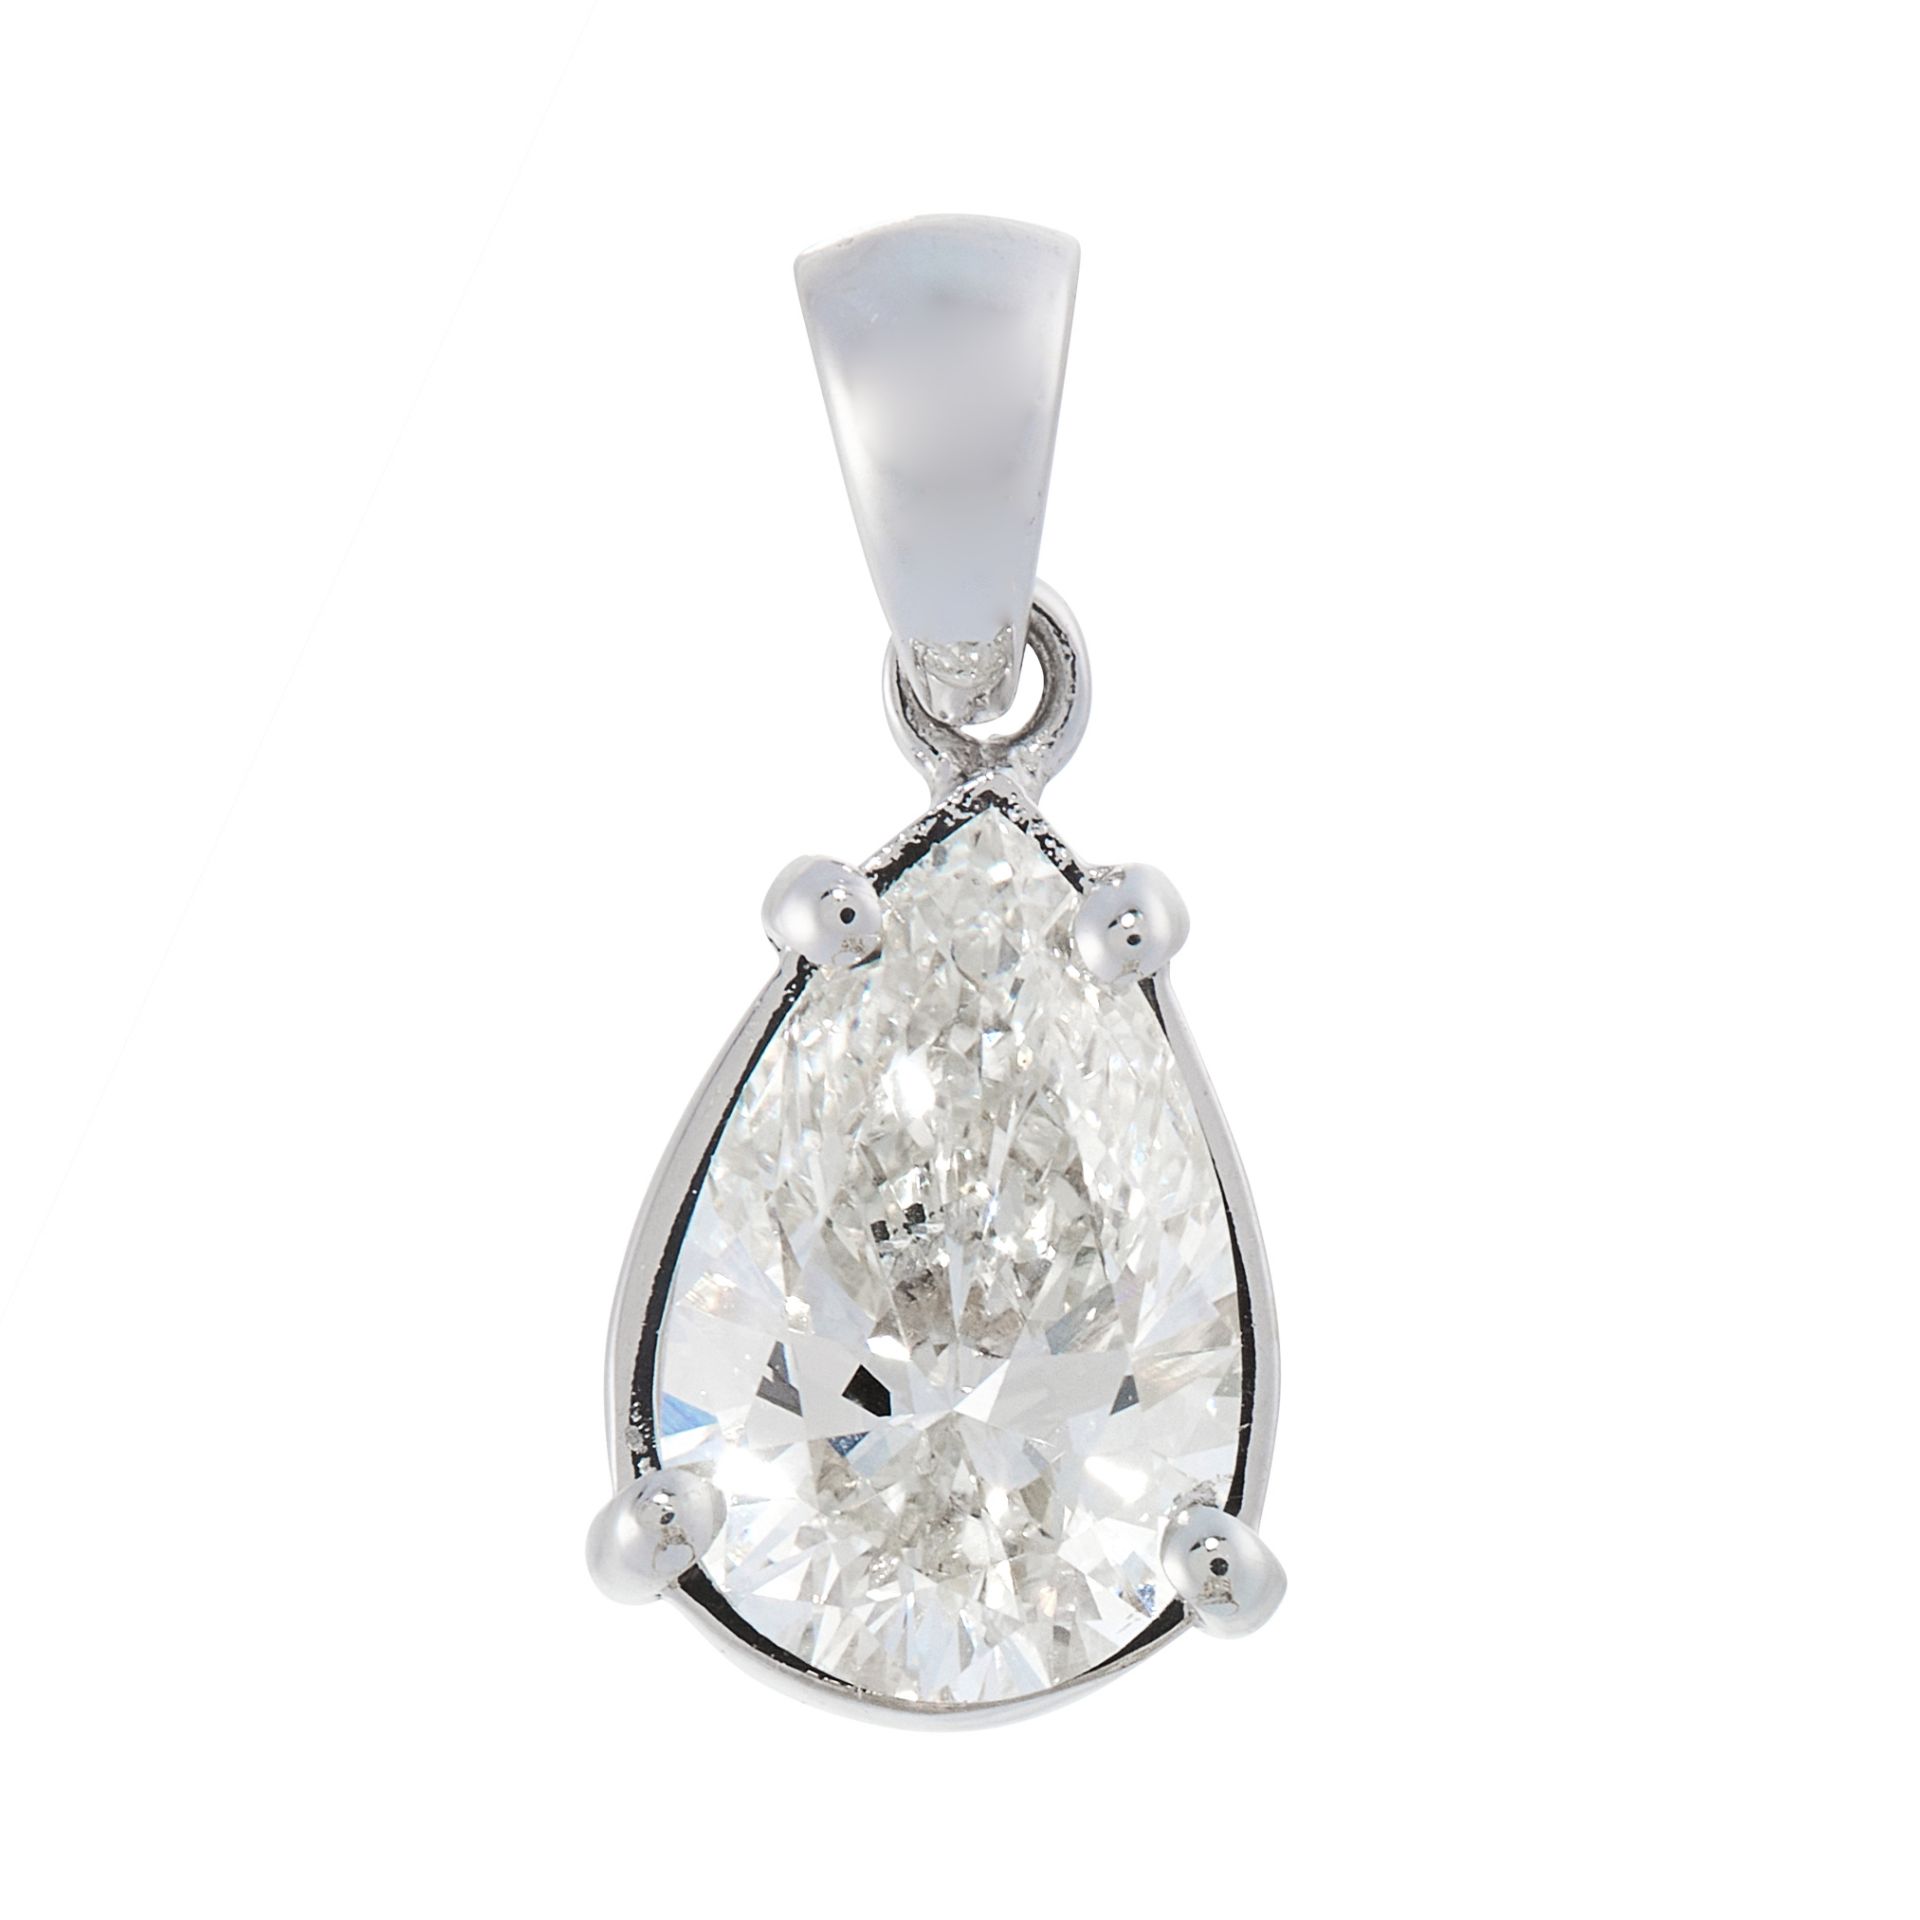 A SOLITARIE DIAMOND PENDANT in 18ct white gold, set with a pear shaped brilliant cut diamond of 1.10